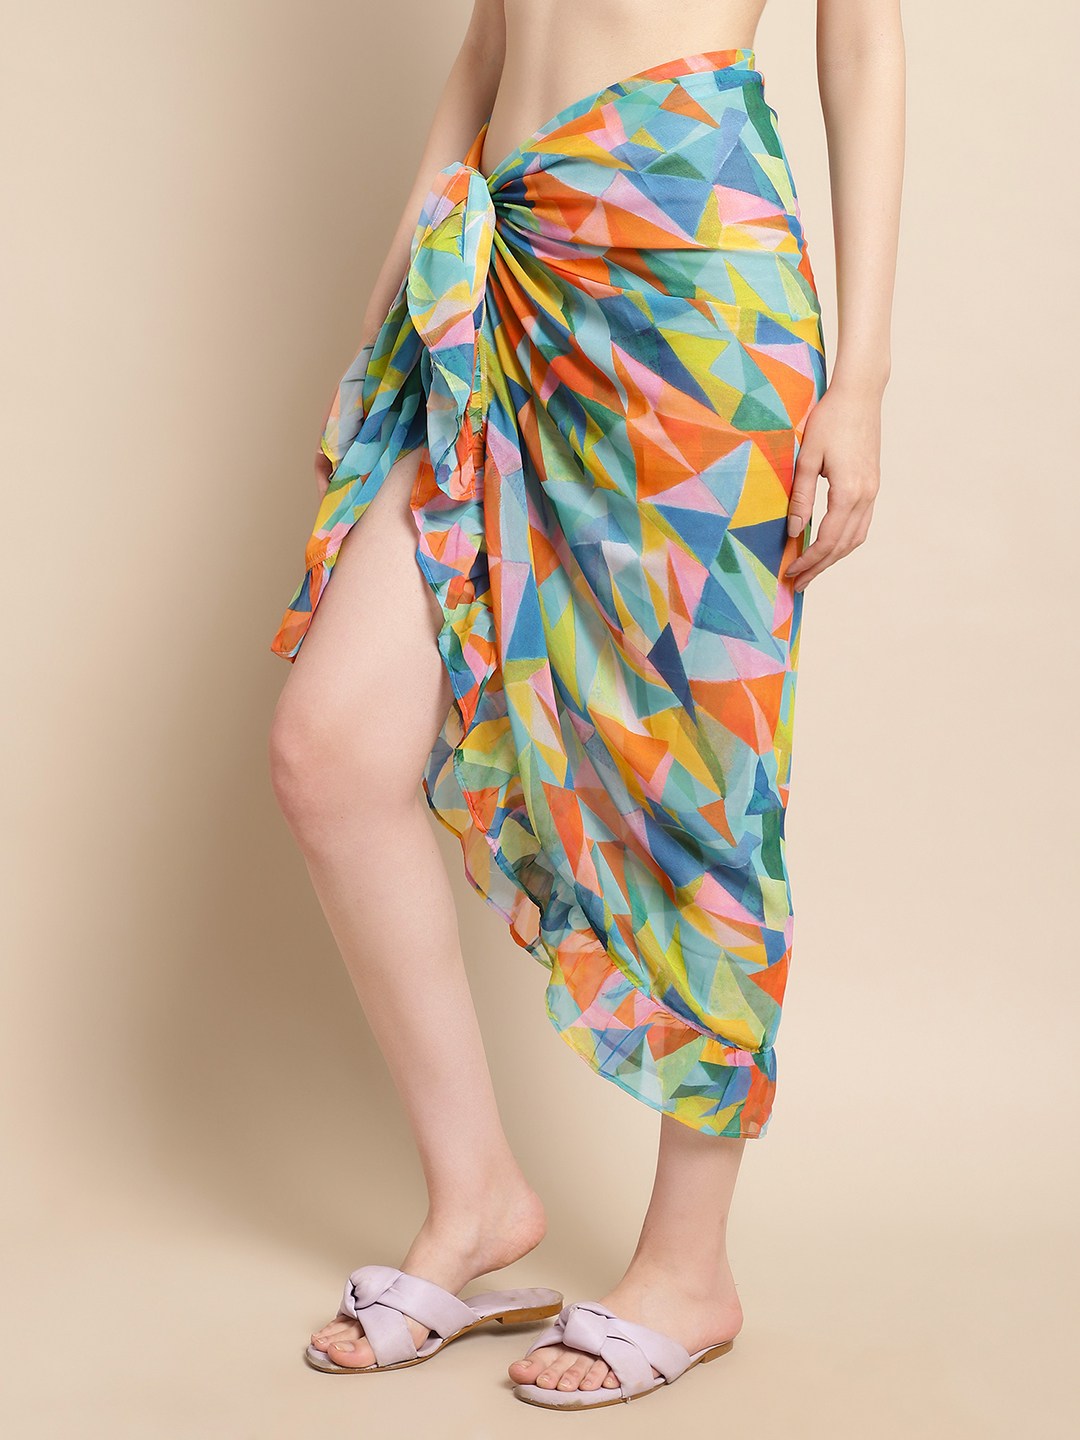 Multi Color Geometric Printed Georgette Bottom Coverup Sarong For Women Claura Designs Pvt. Ltd. Beachwear Beachwear_size, Cover-up, Coverup, georgette, multi color, Sarong, Swimwear